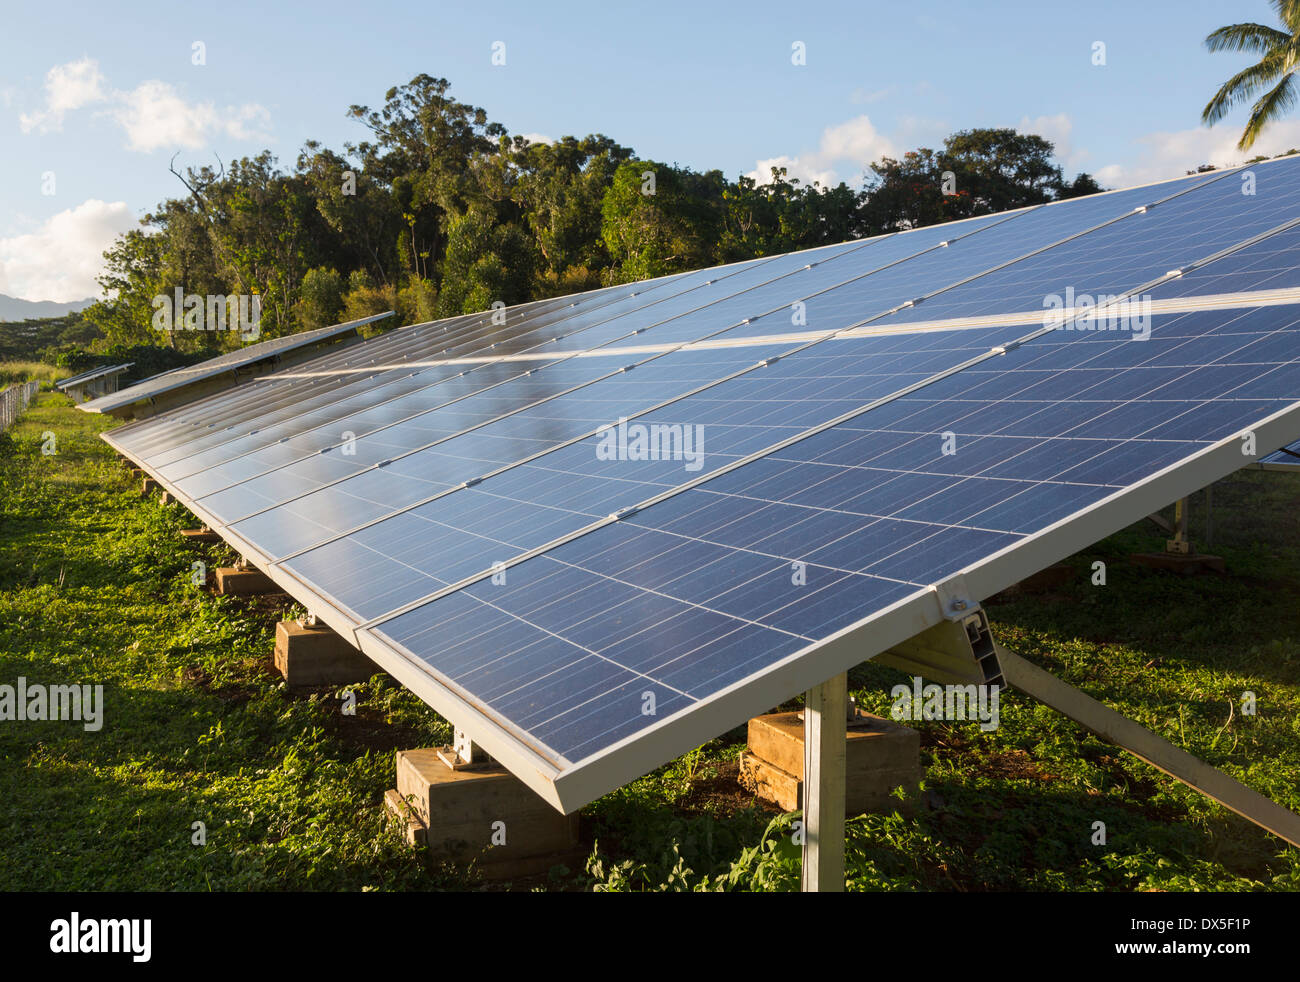 Large industrial solar power panel installation in a tropical environment - renewable energy Stock Photo